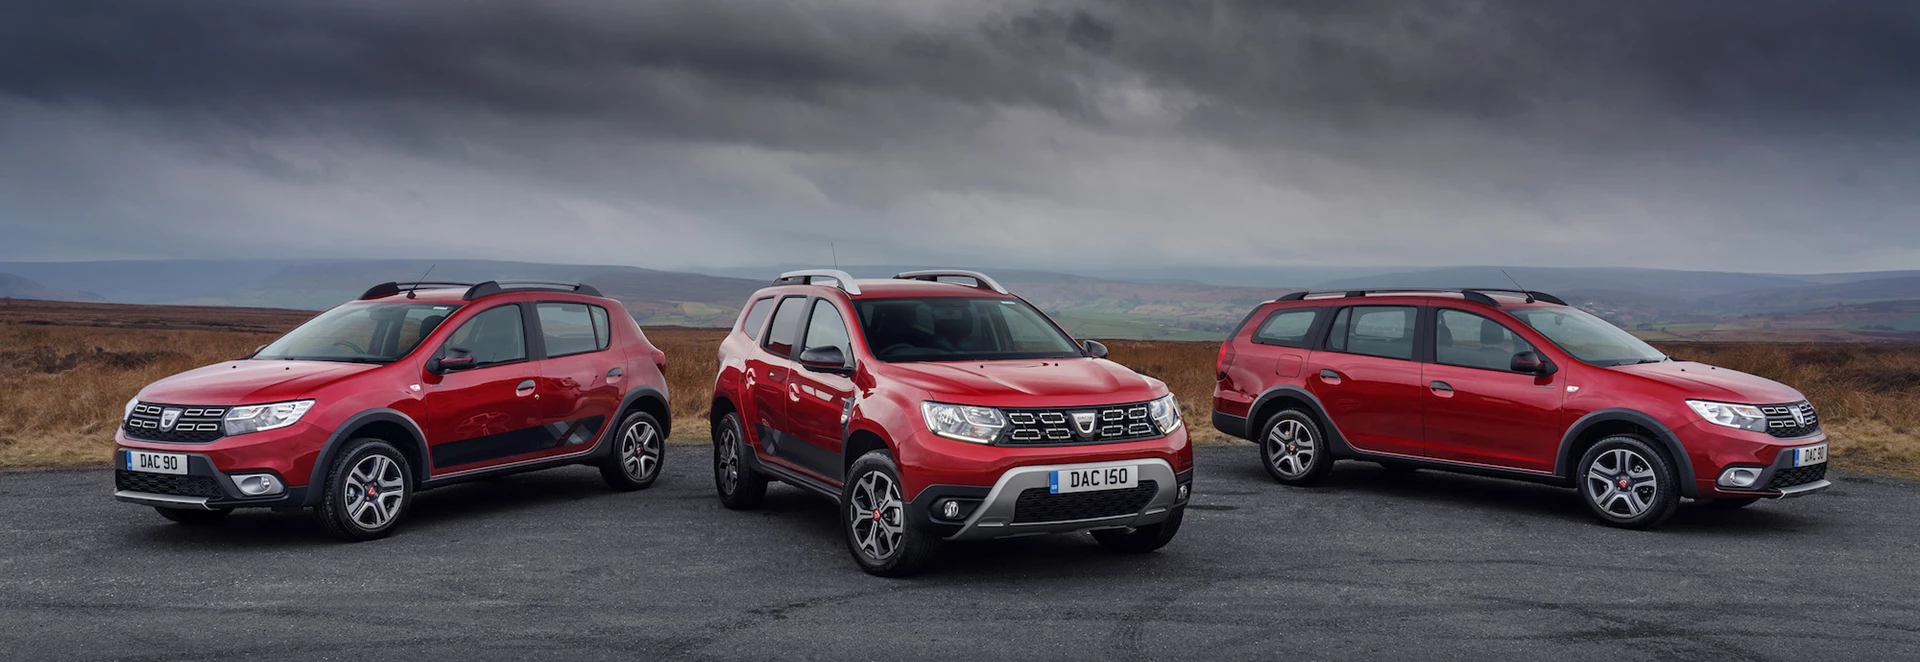 Dacia’s new Techroad models could be the affordable luxury you’ve been waiting for…